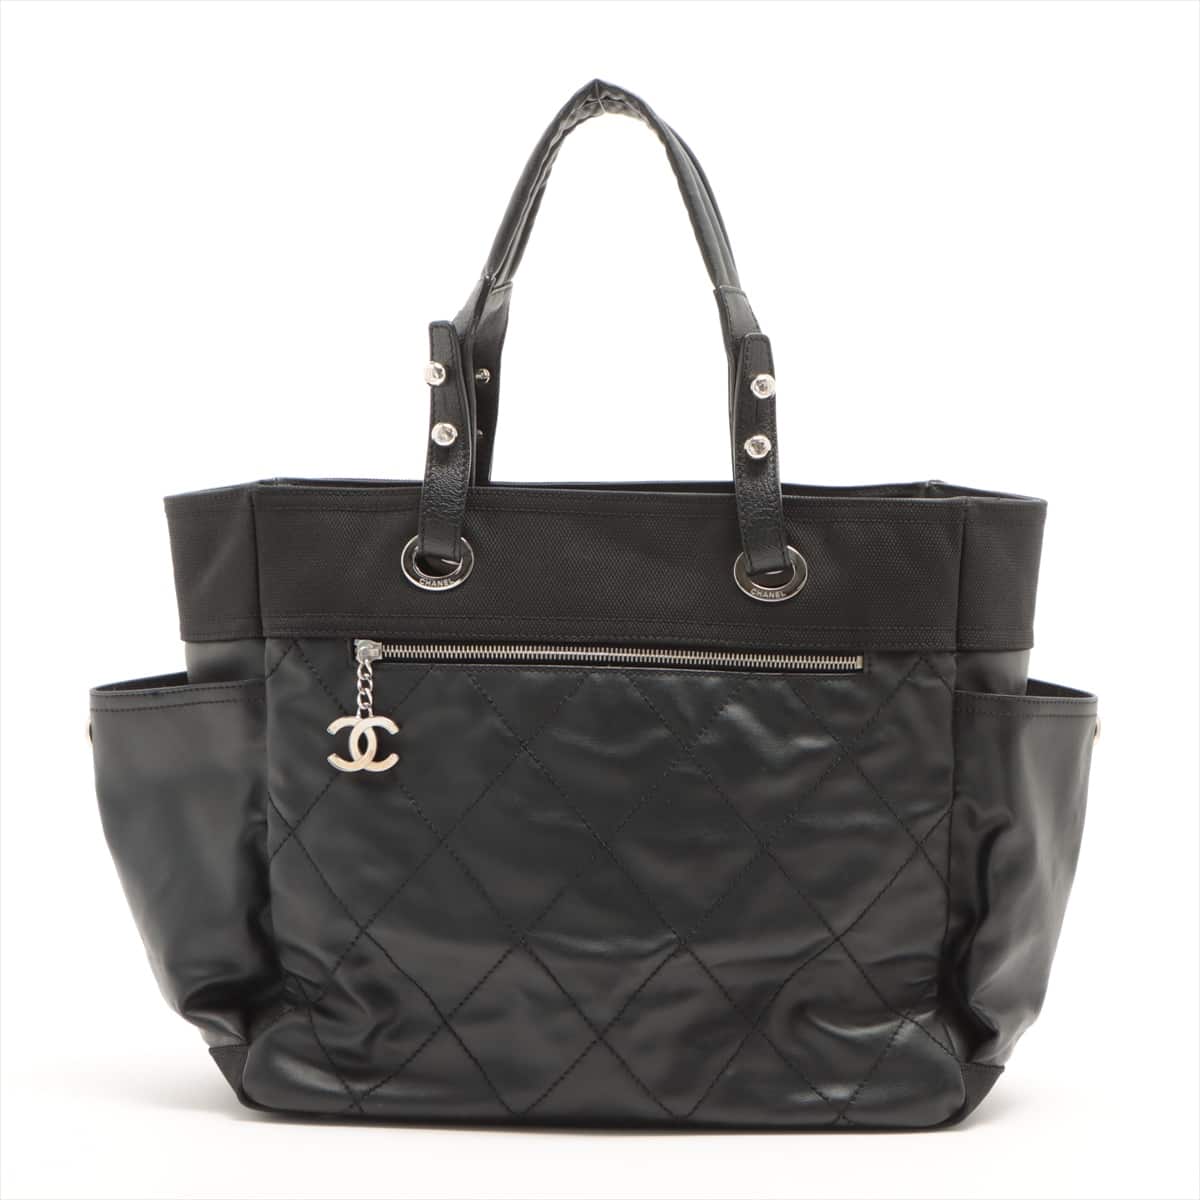 Chanel Paris Biarritz GM Coating canvas Tote bag Black Silver Metal fittings 11XXXXXX with pouch